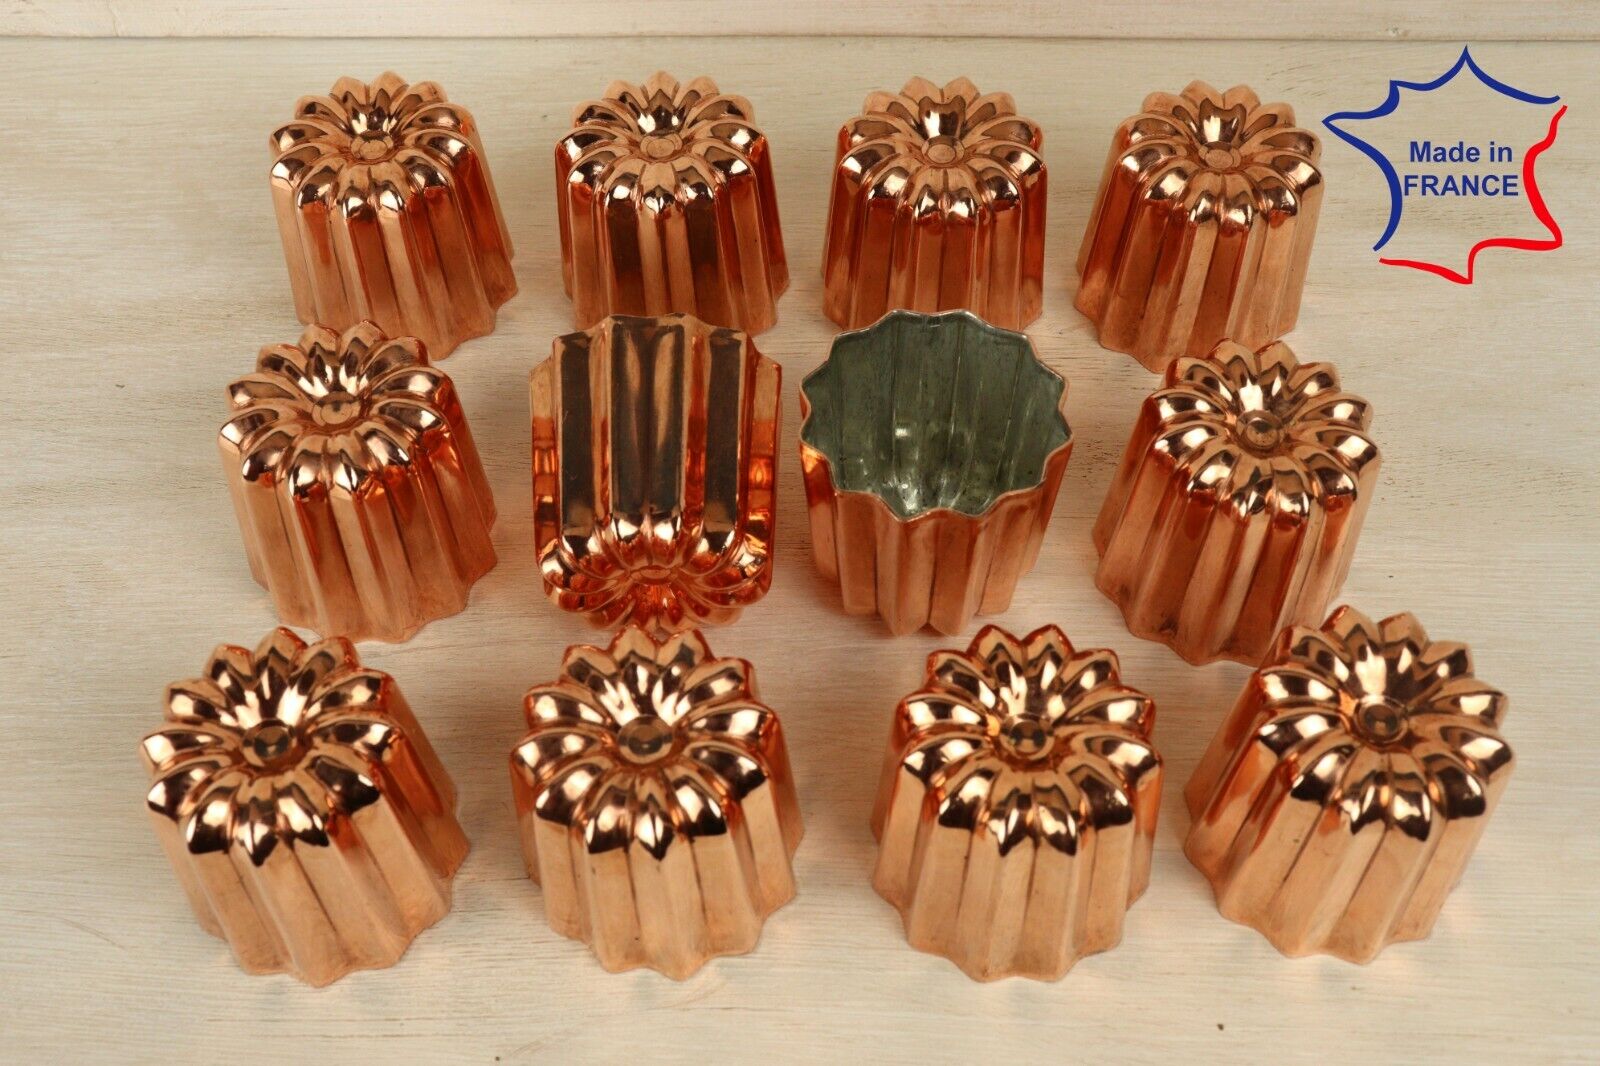 12 Copper canele molds medium 1.75 inches 12 Copper cannele made in France